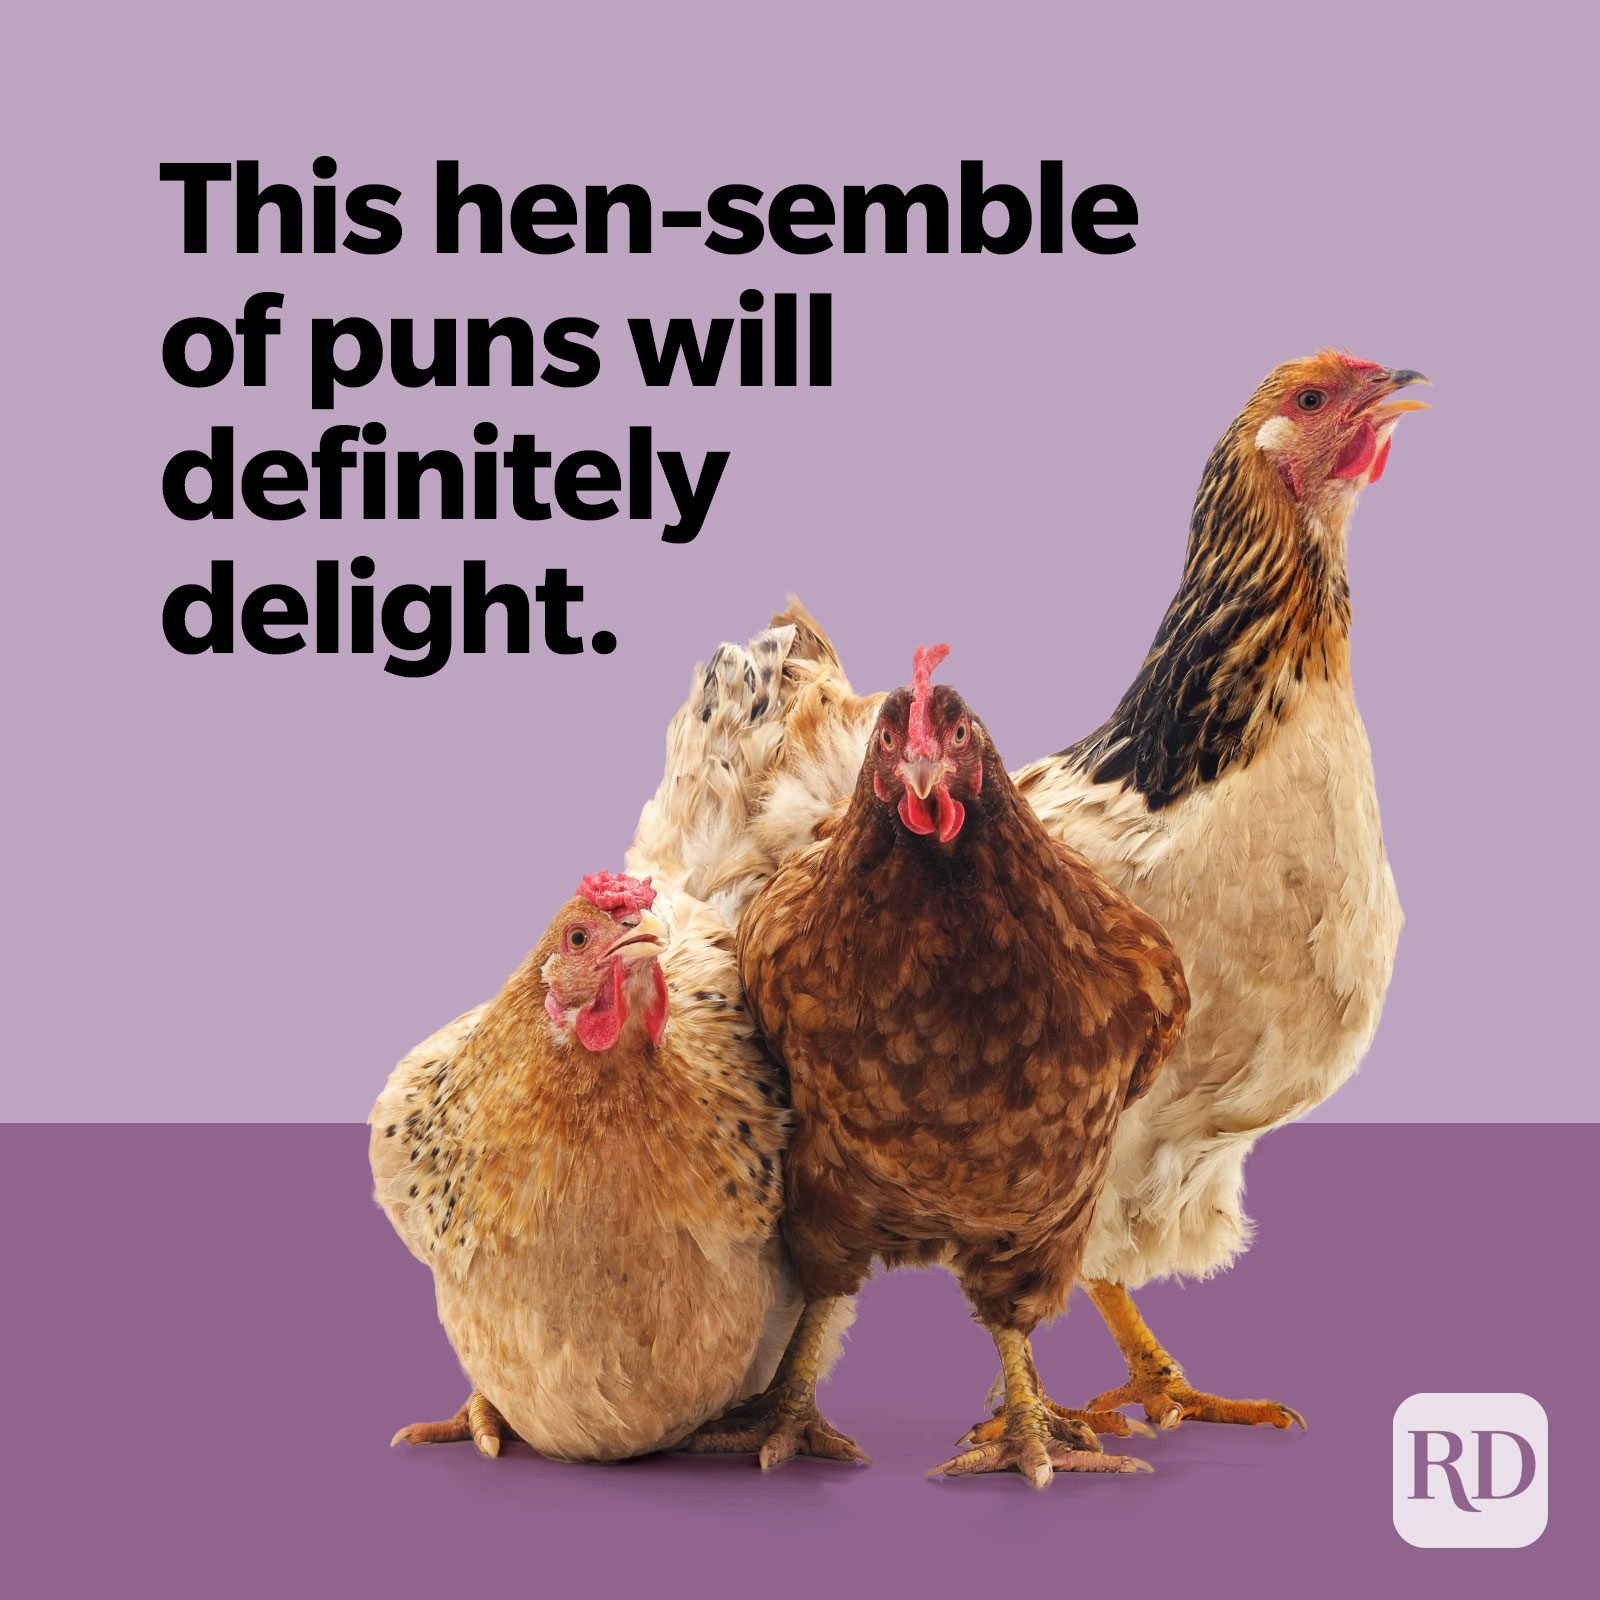 funny chickens